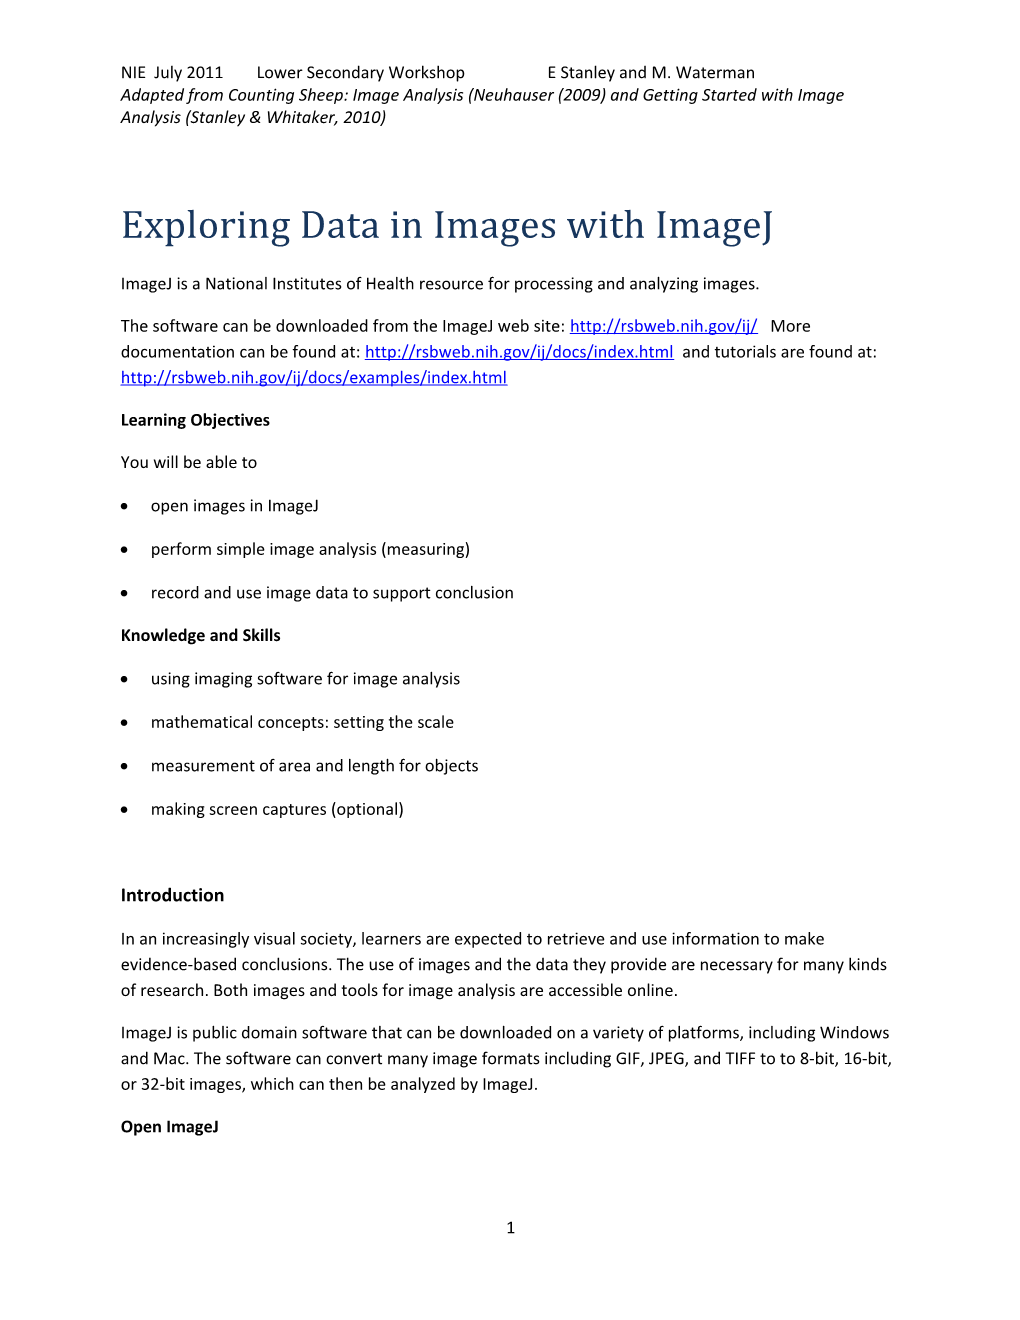 Exploring Data in Images with Imagej